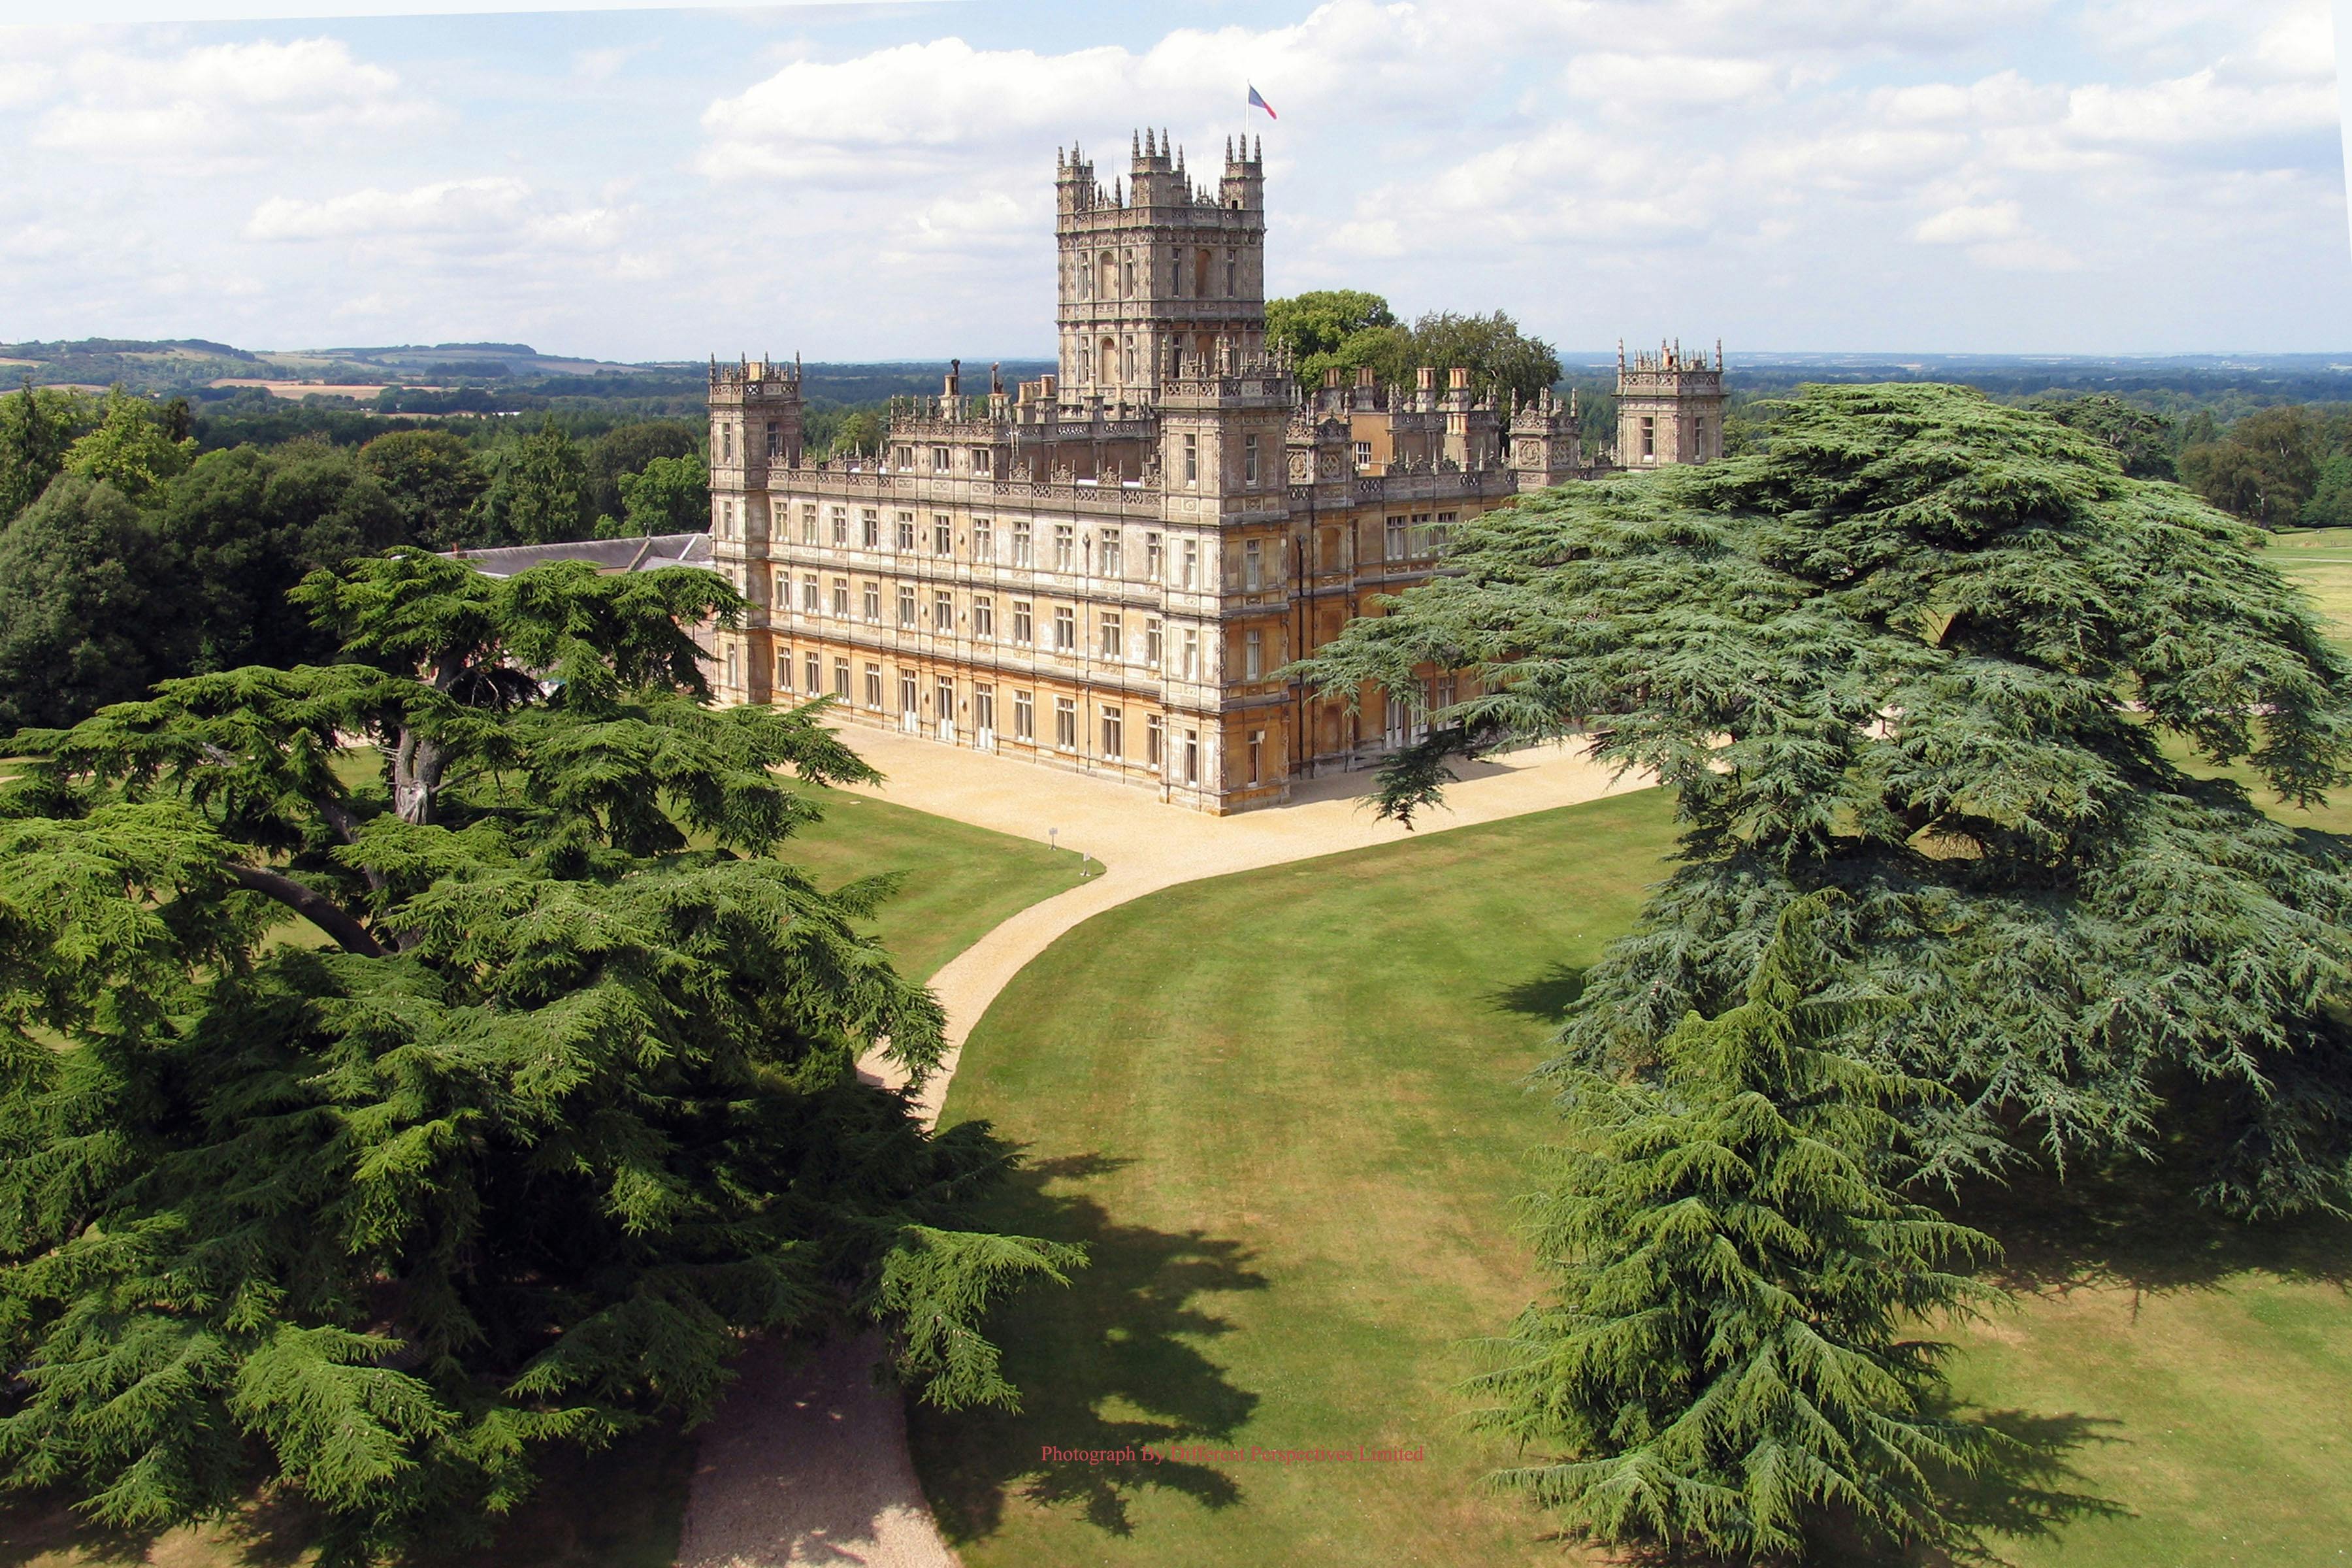 Downton Abbey and village small group tour from London